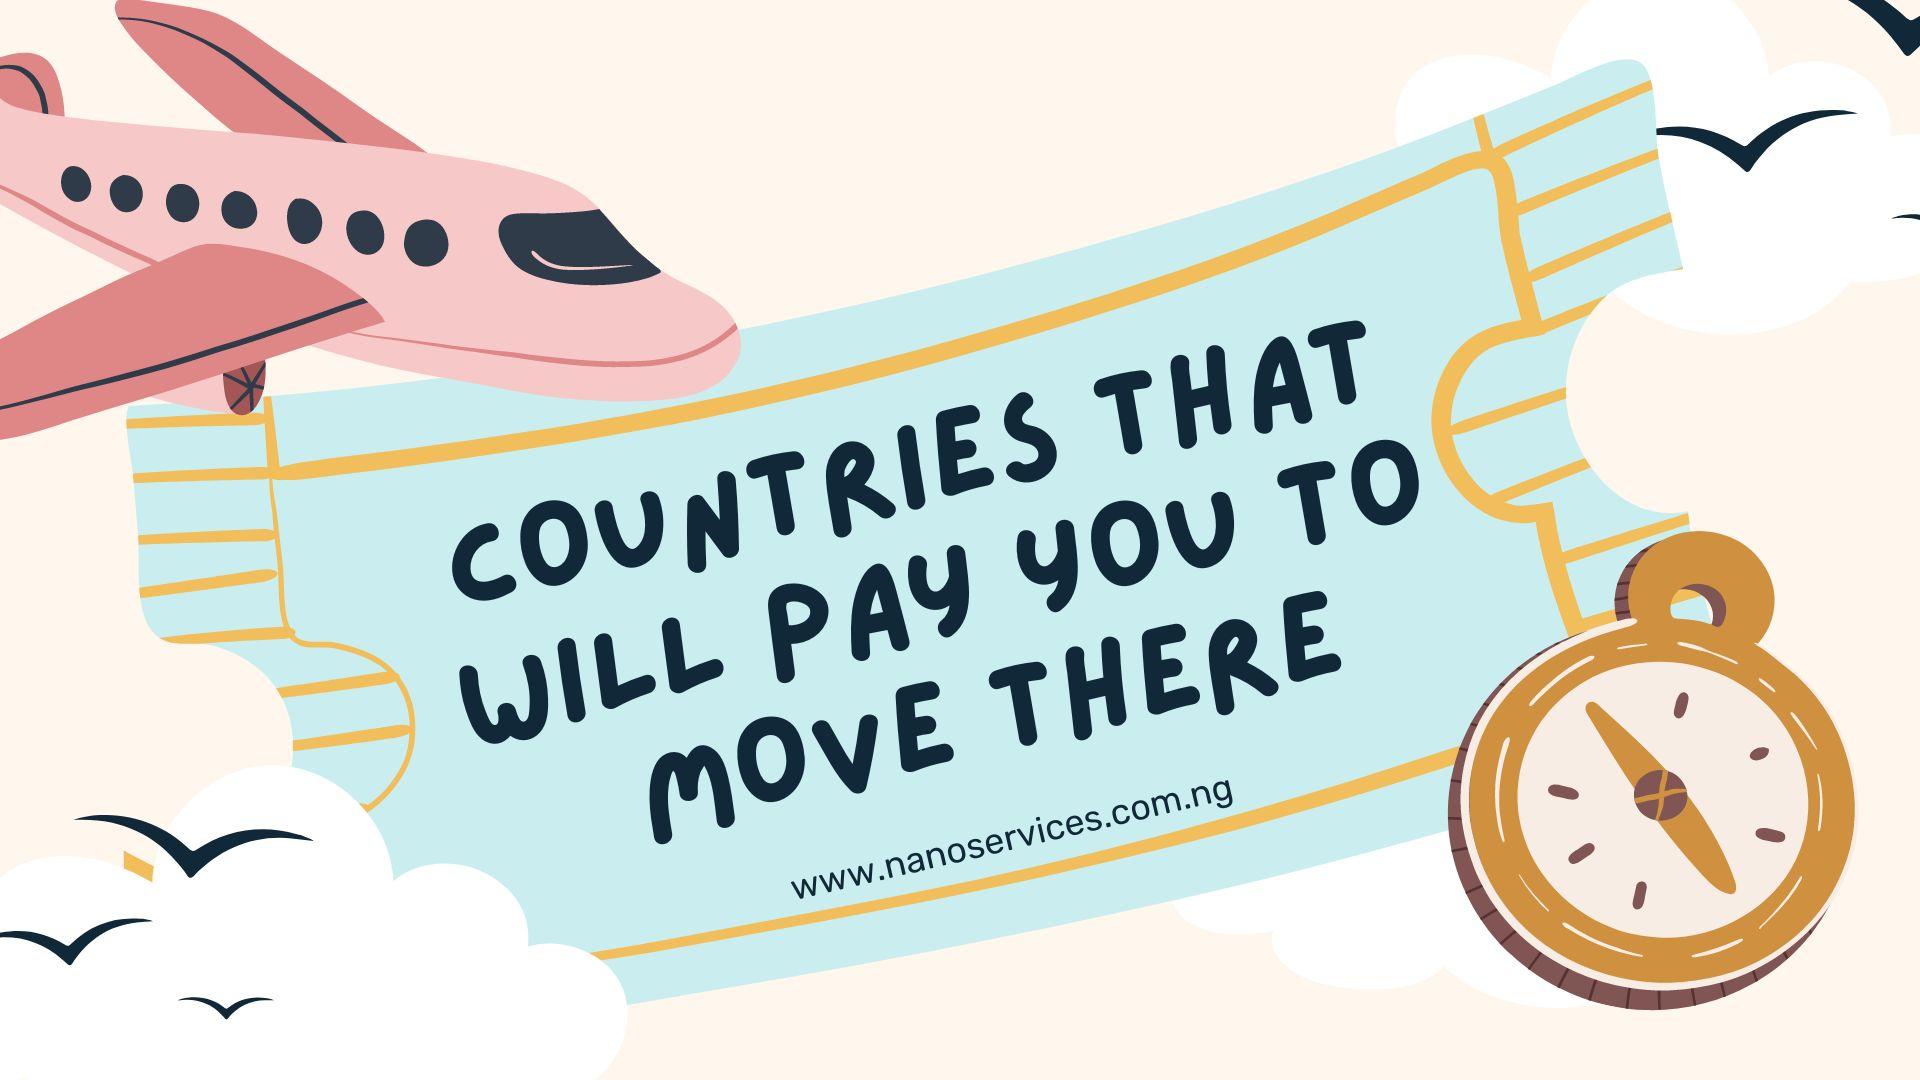 Get Paid to Move: Top 10 Countries That Will Pay You to Move There